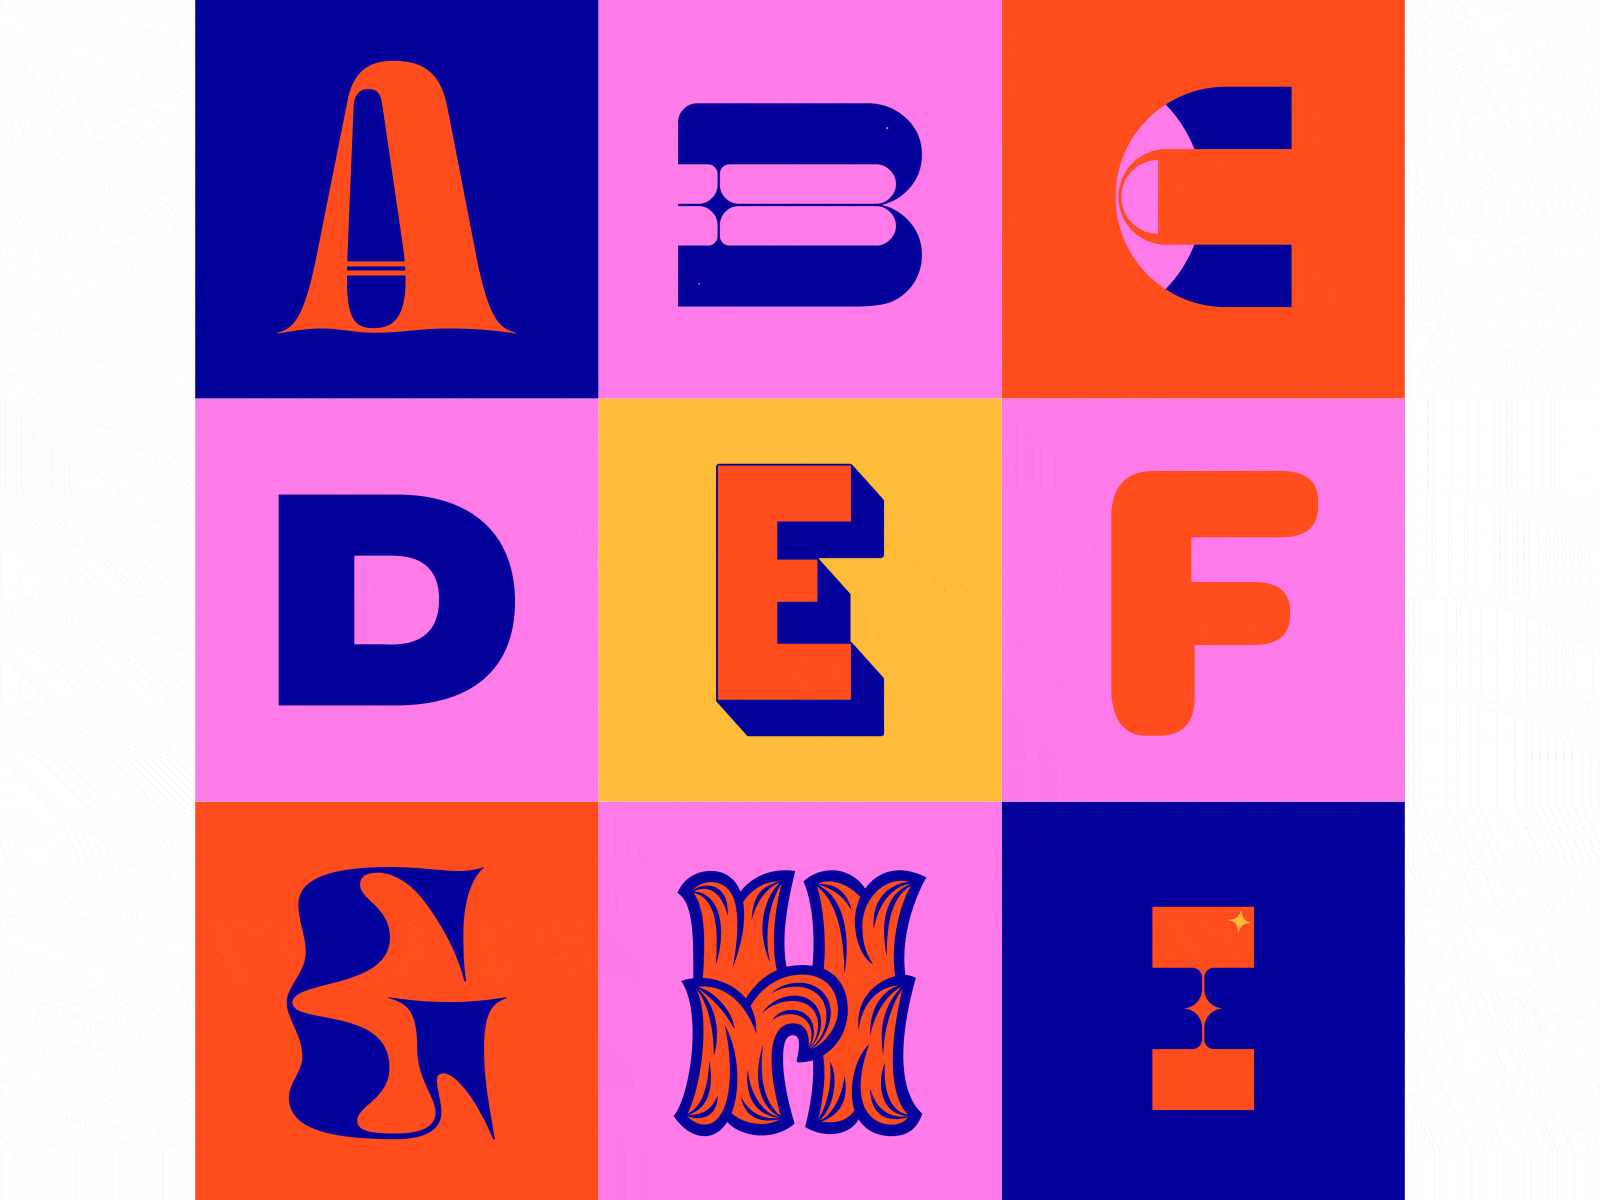 36 Days of Type / Overview 36 days of type 36daysoftype 36daysoftype08 36dot ae after effects animated animated type animation animography colors design kinetic kinetic type motion motion design motion graphic motion graphics type typography